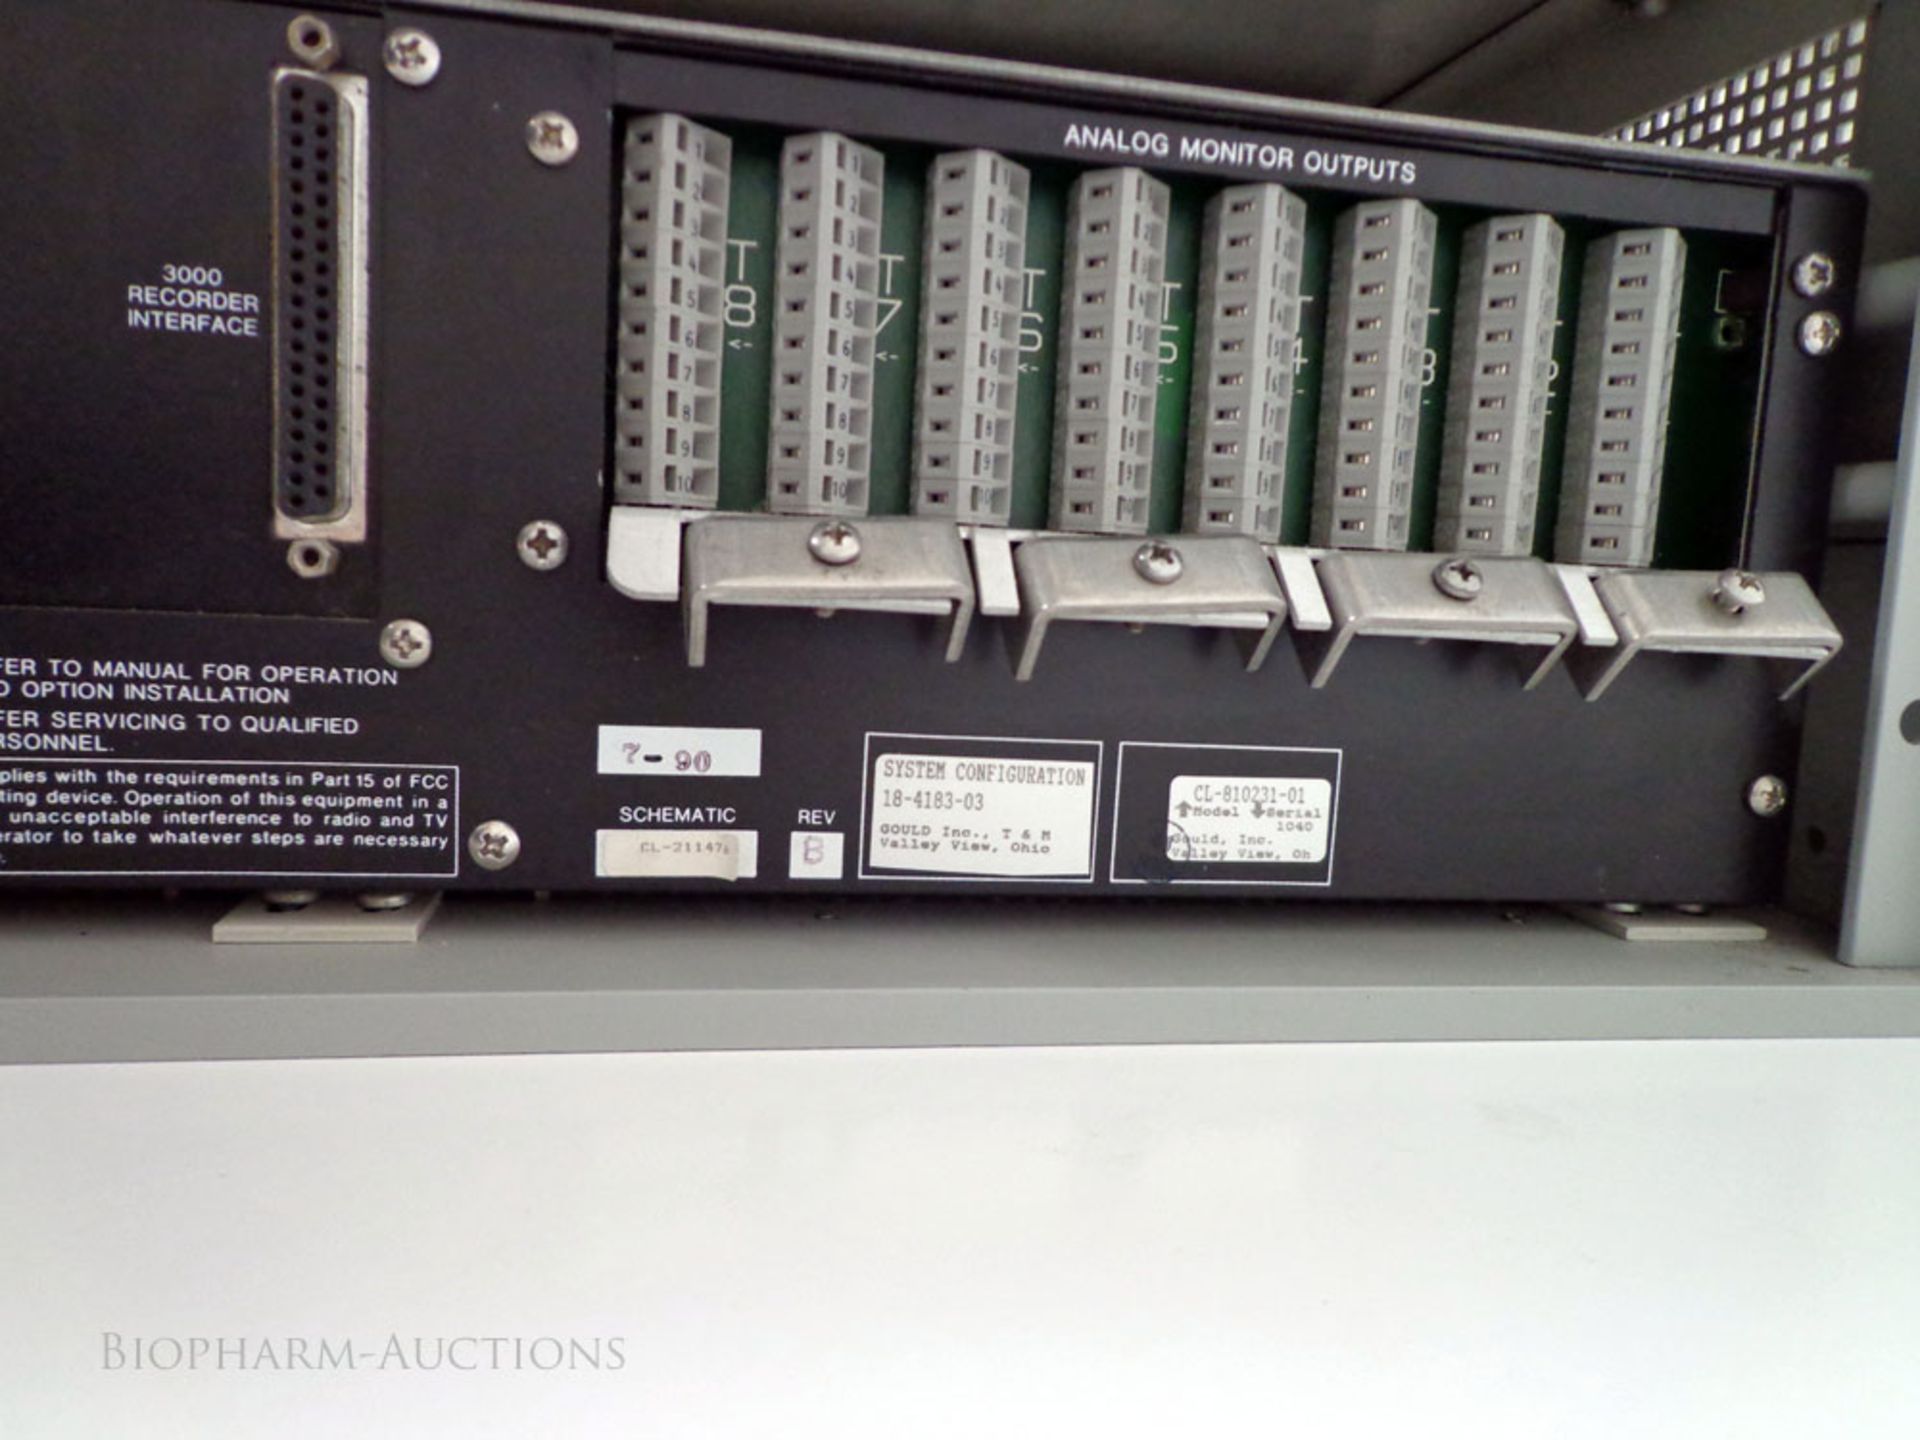 GOULD 5900 Signal Conditioner CageCL-810231-01, S/N 1040. - Image 3 of 3